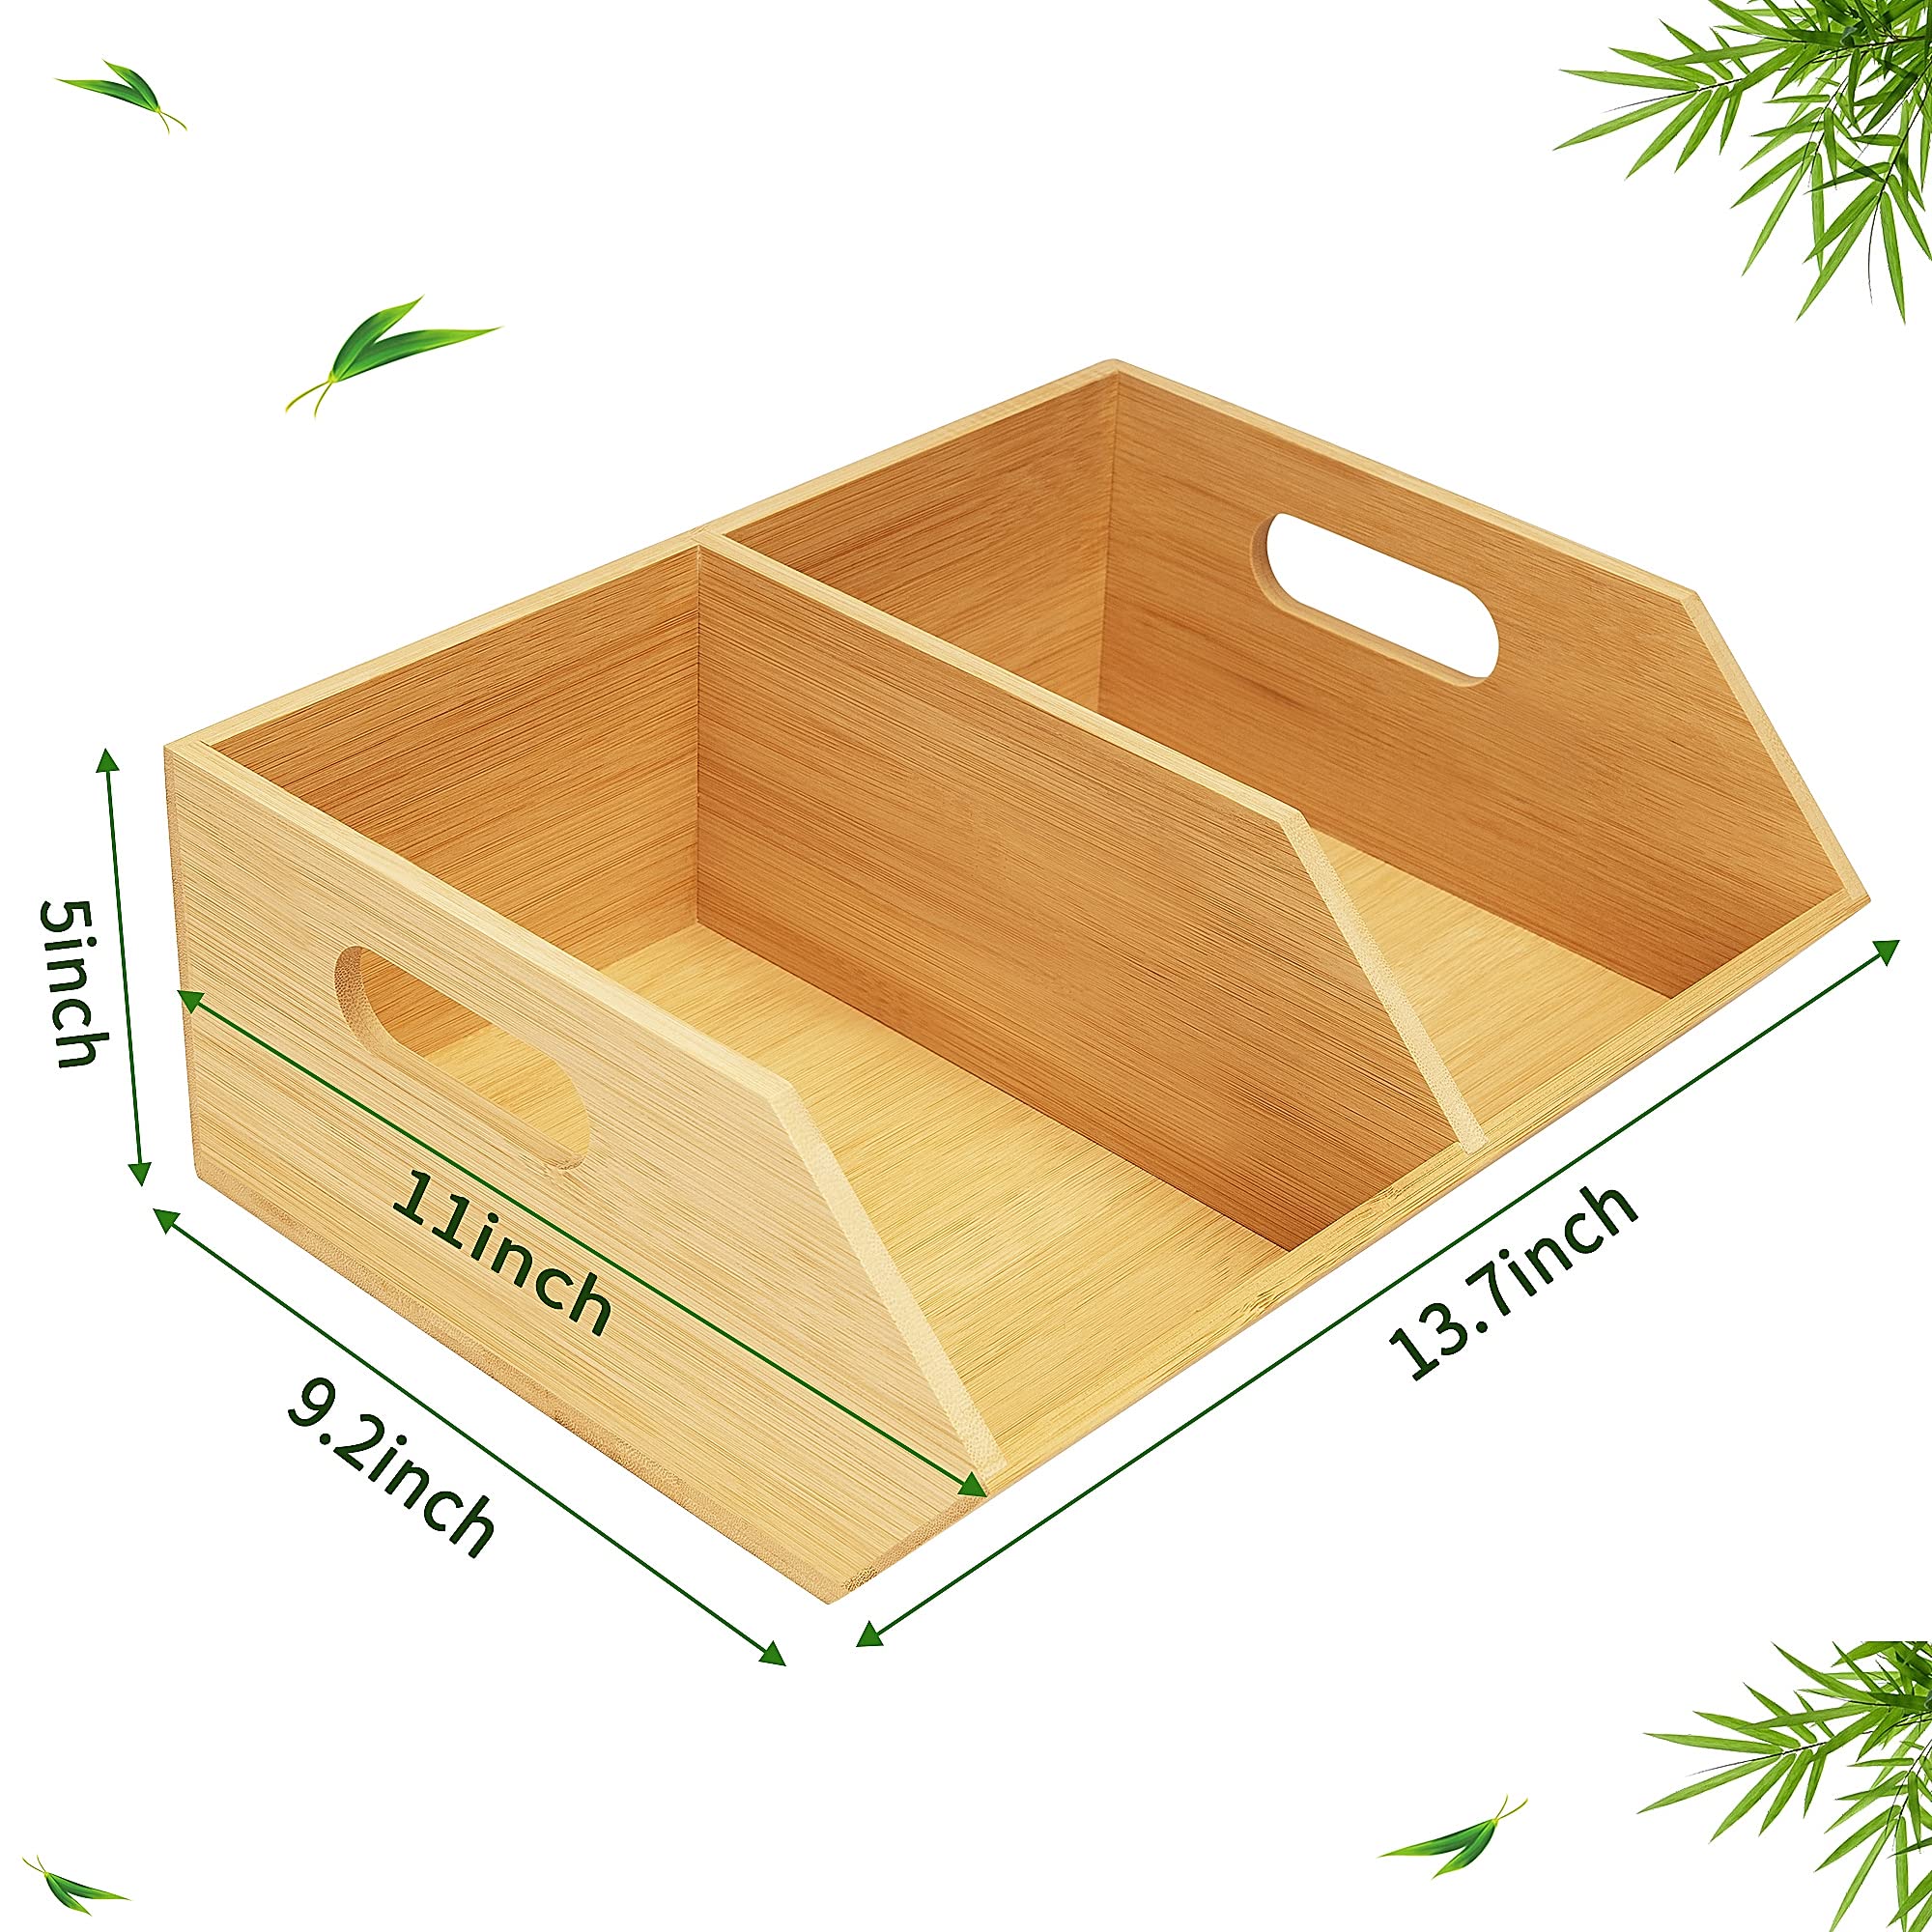 otovioia Bamboo Storage Bin for Kitchen Organizer, Pantry Organization and Storage Basket, Versatile Containers for Produce, Fruit, Bread, Vegetable, Potatoes, Onions, and Garlic